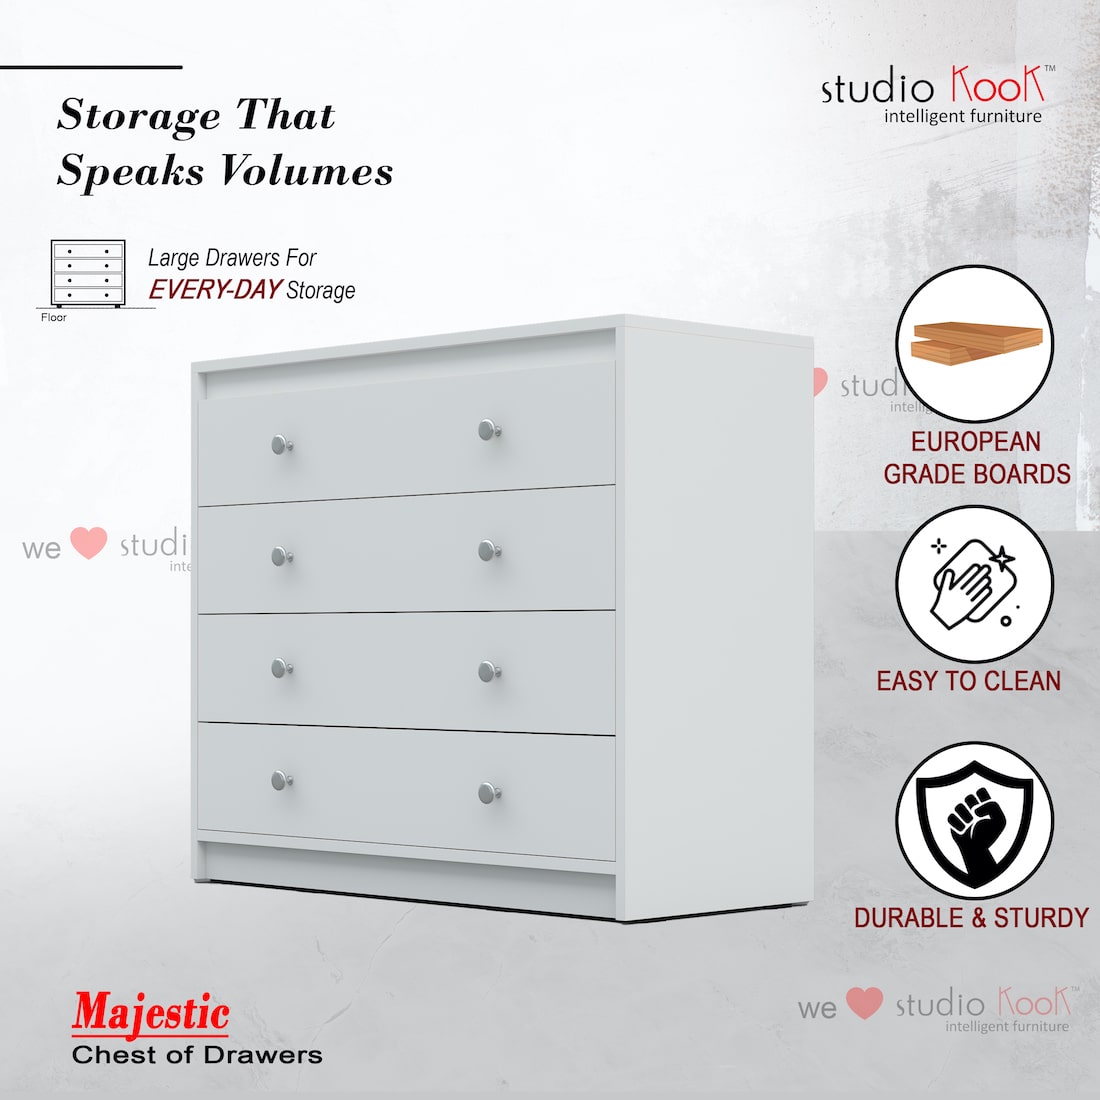 Majestic Chest of Drawers (Moonshine White, Matte Finish)